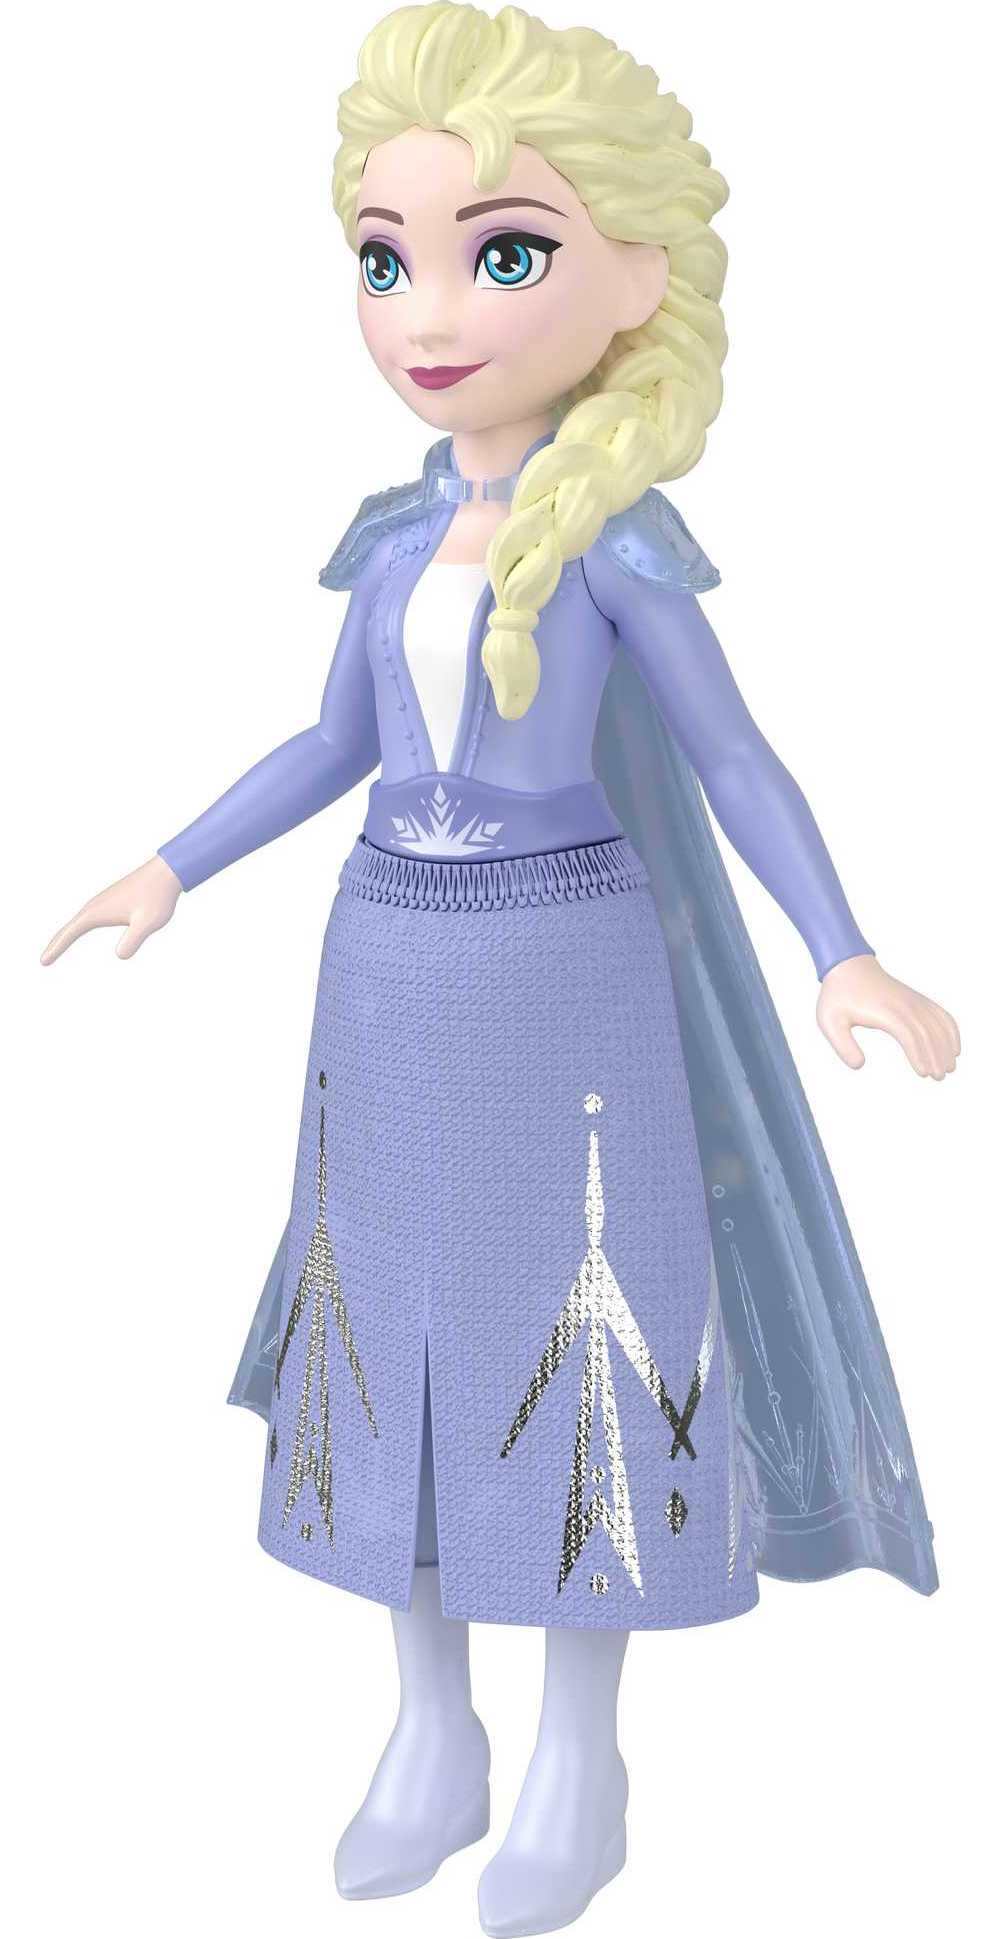 Disney Frozen Elsa Small Doll in Travel Look, Posable with Removable Cape & Skirt - image 4 of 6